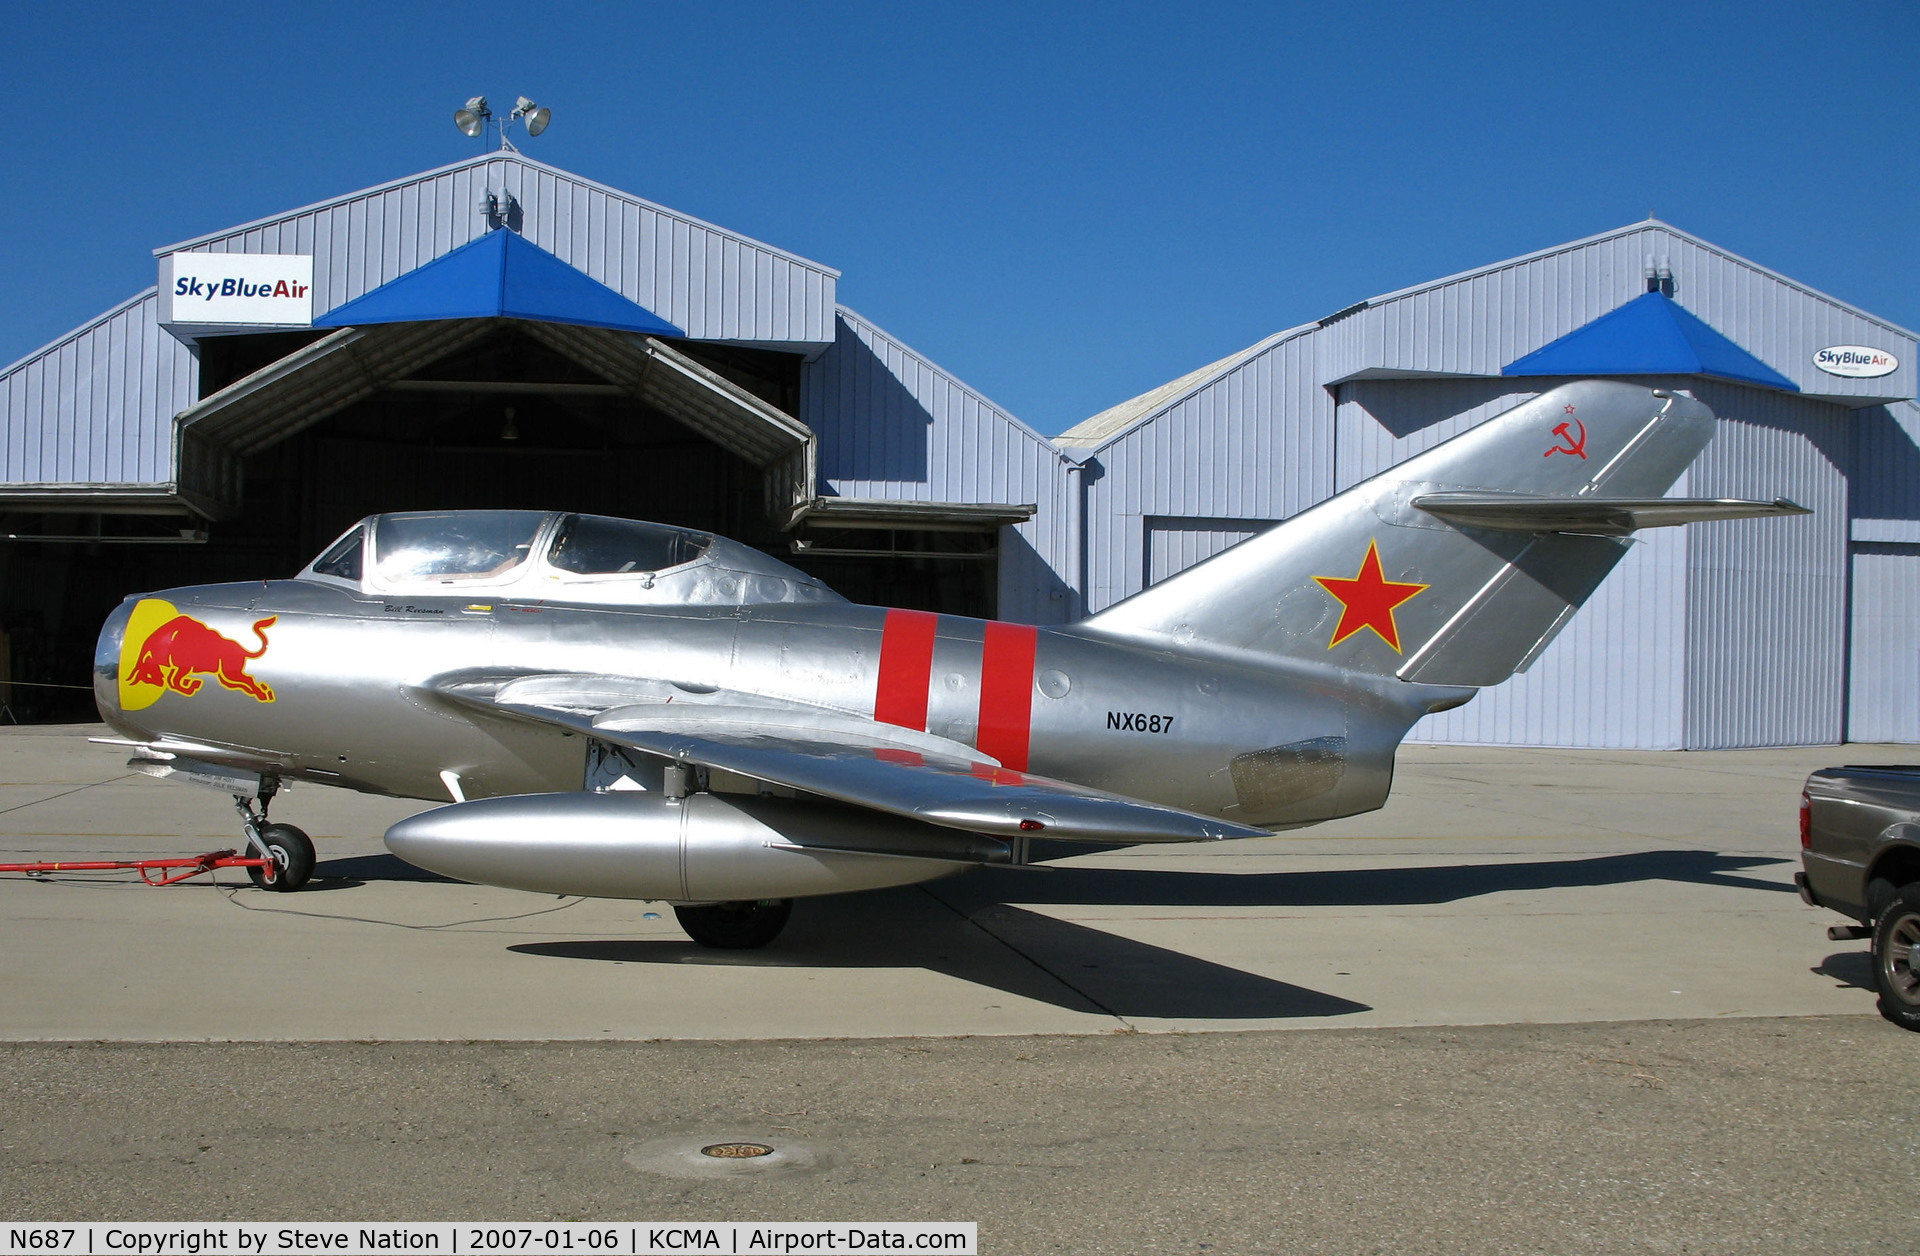 N687, 1953 Mikoyan-Gurevich MiG-15UTI C/N 1A02005, RED BULL MIG-15UTI in Soviet cs  (painted as NX687) at Camarillo Airport (CA) home base on sunny, balmy January day